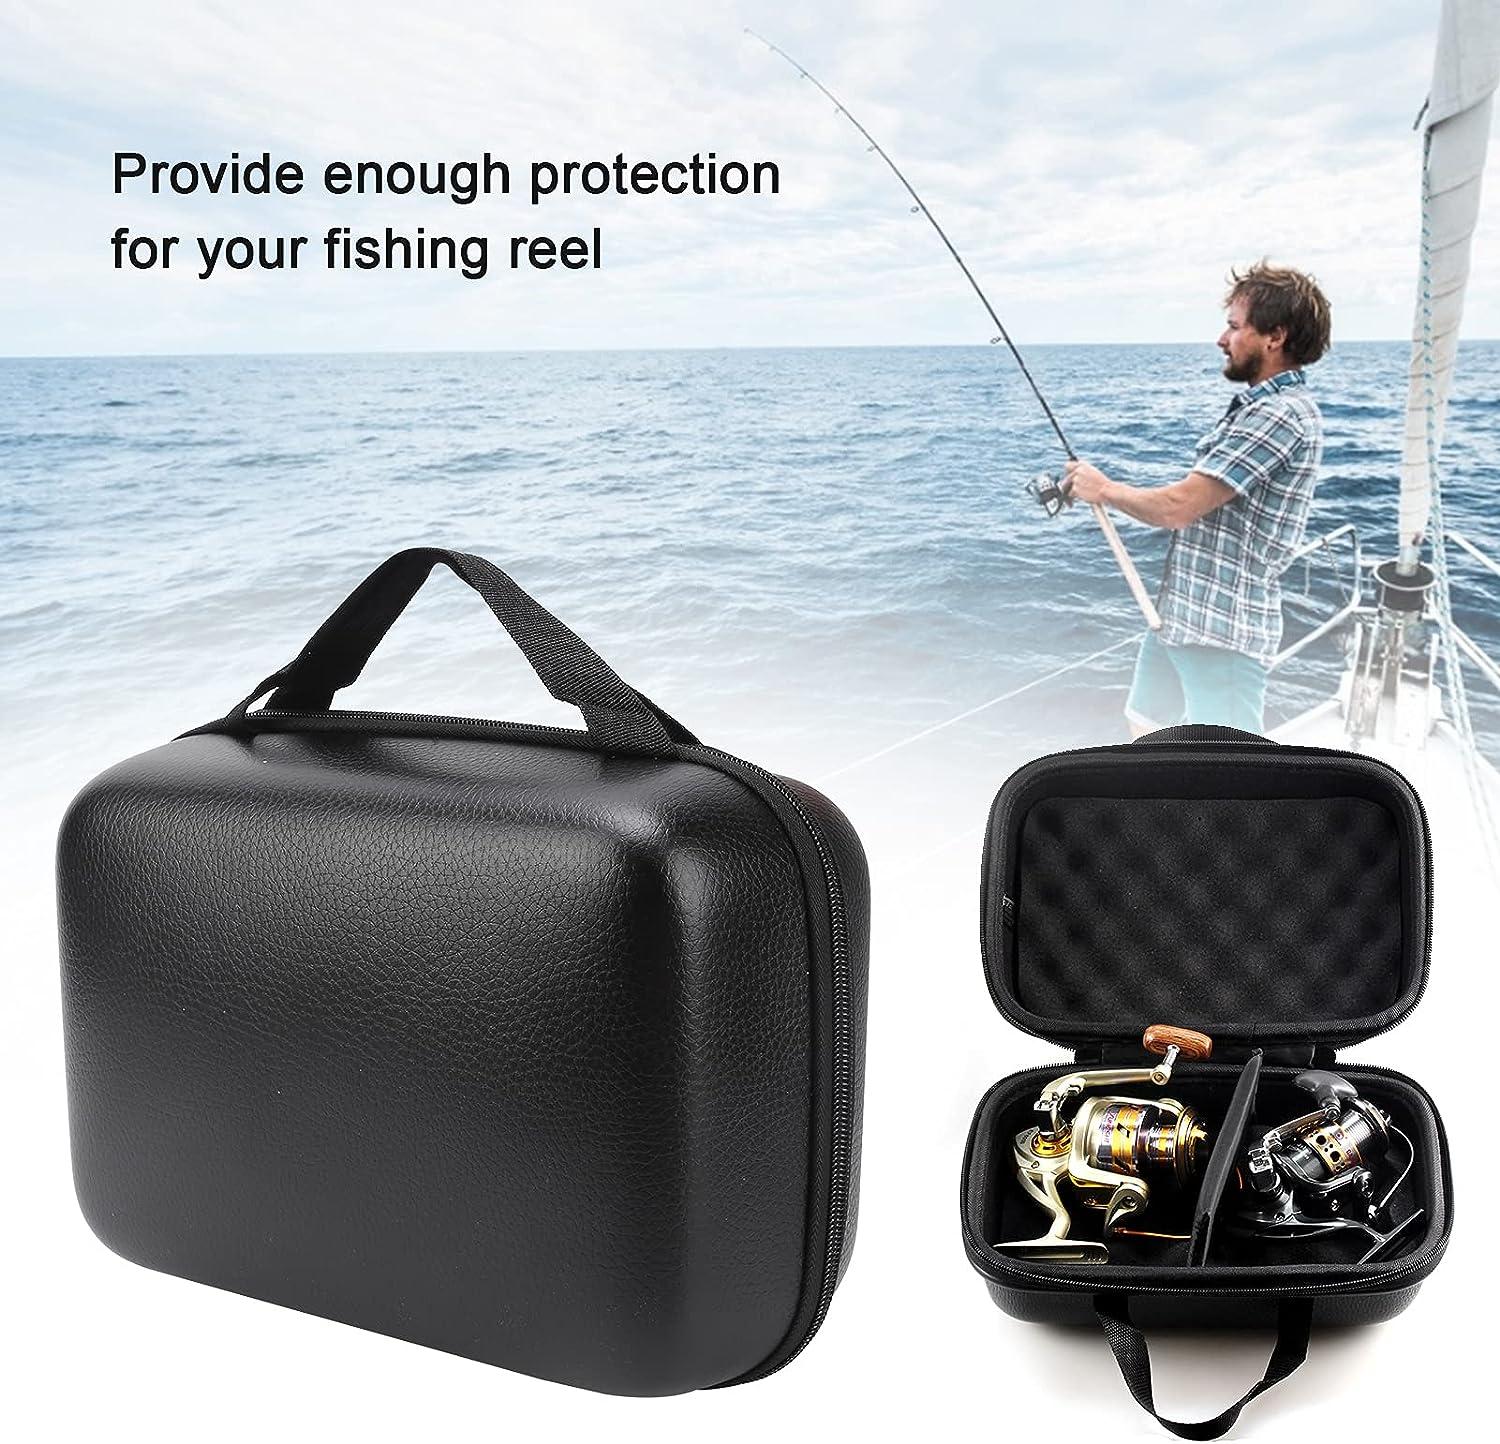 Reel Cover Bag Provide Better Protection For Fishing Accessory